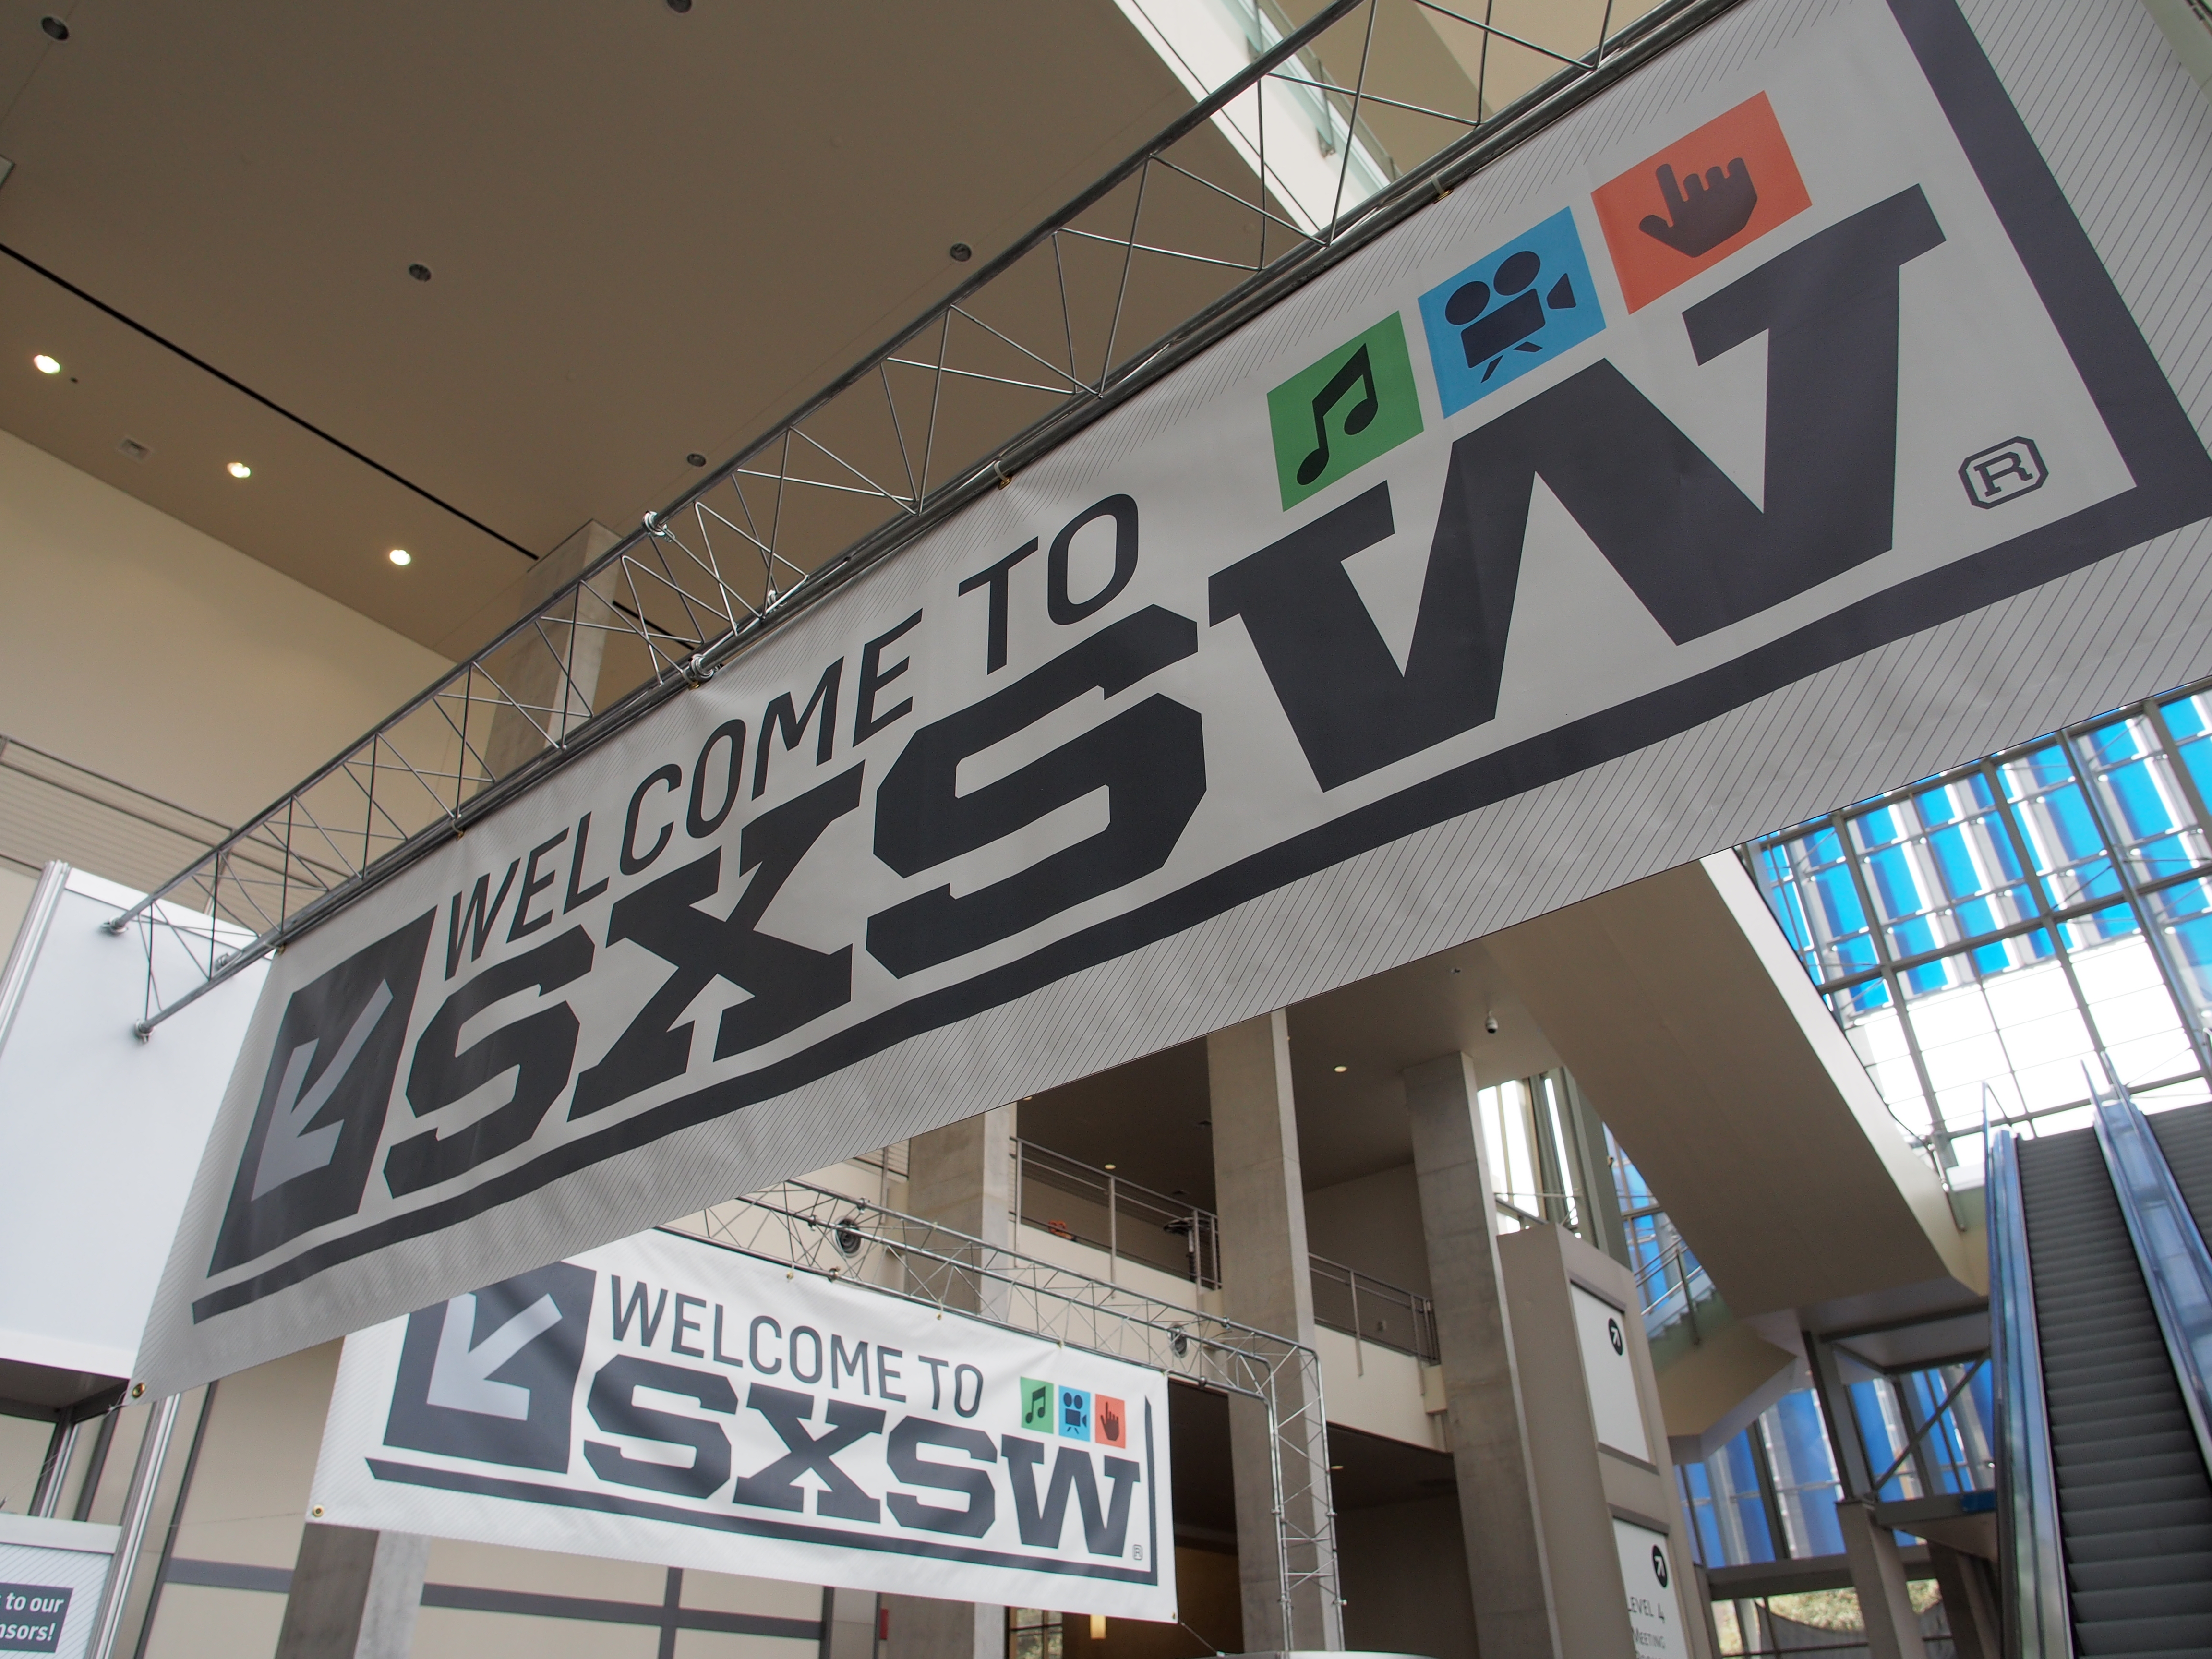 Banners hang in the atrium of the Austin Convention Center on Thursday, March 7, 2012 on the eve of the opening of the 27th South By Southwest (SXSW) interactive, film and music festival. (AFP/Getty Images)